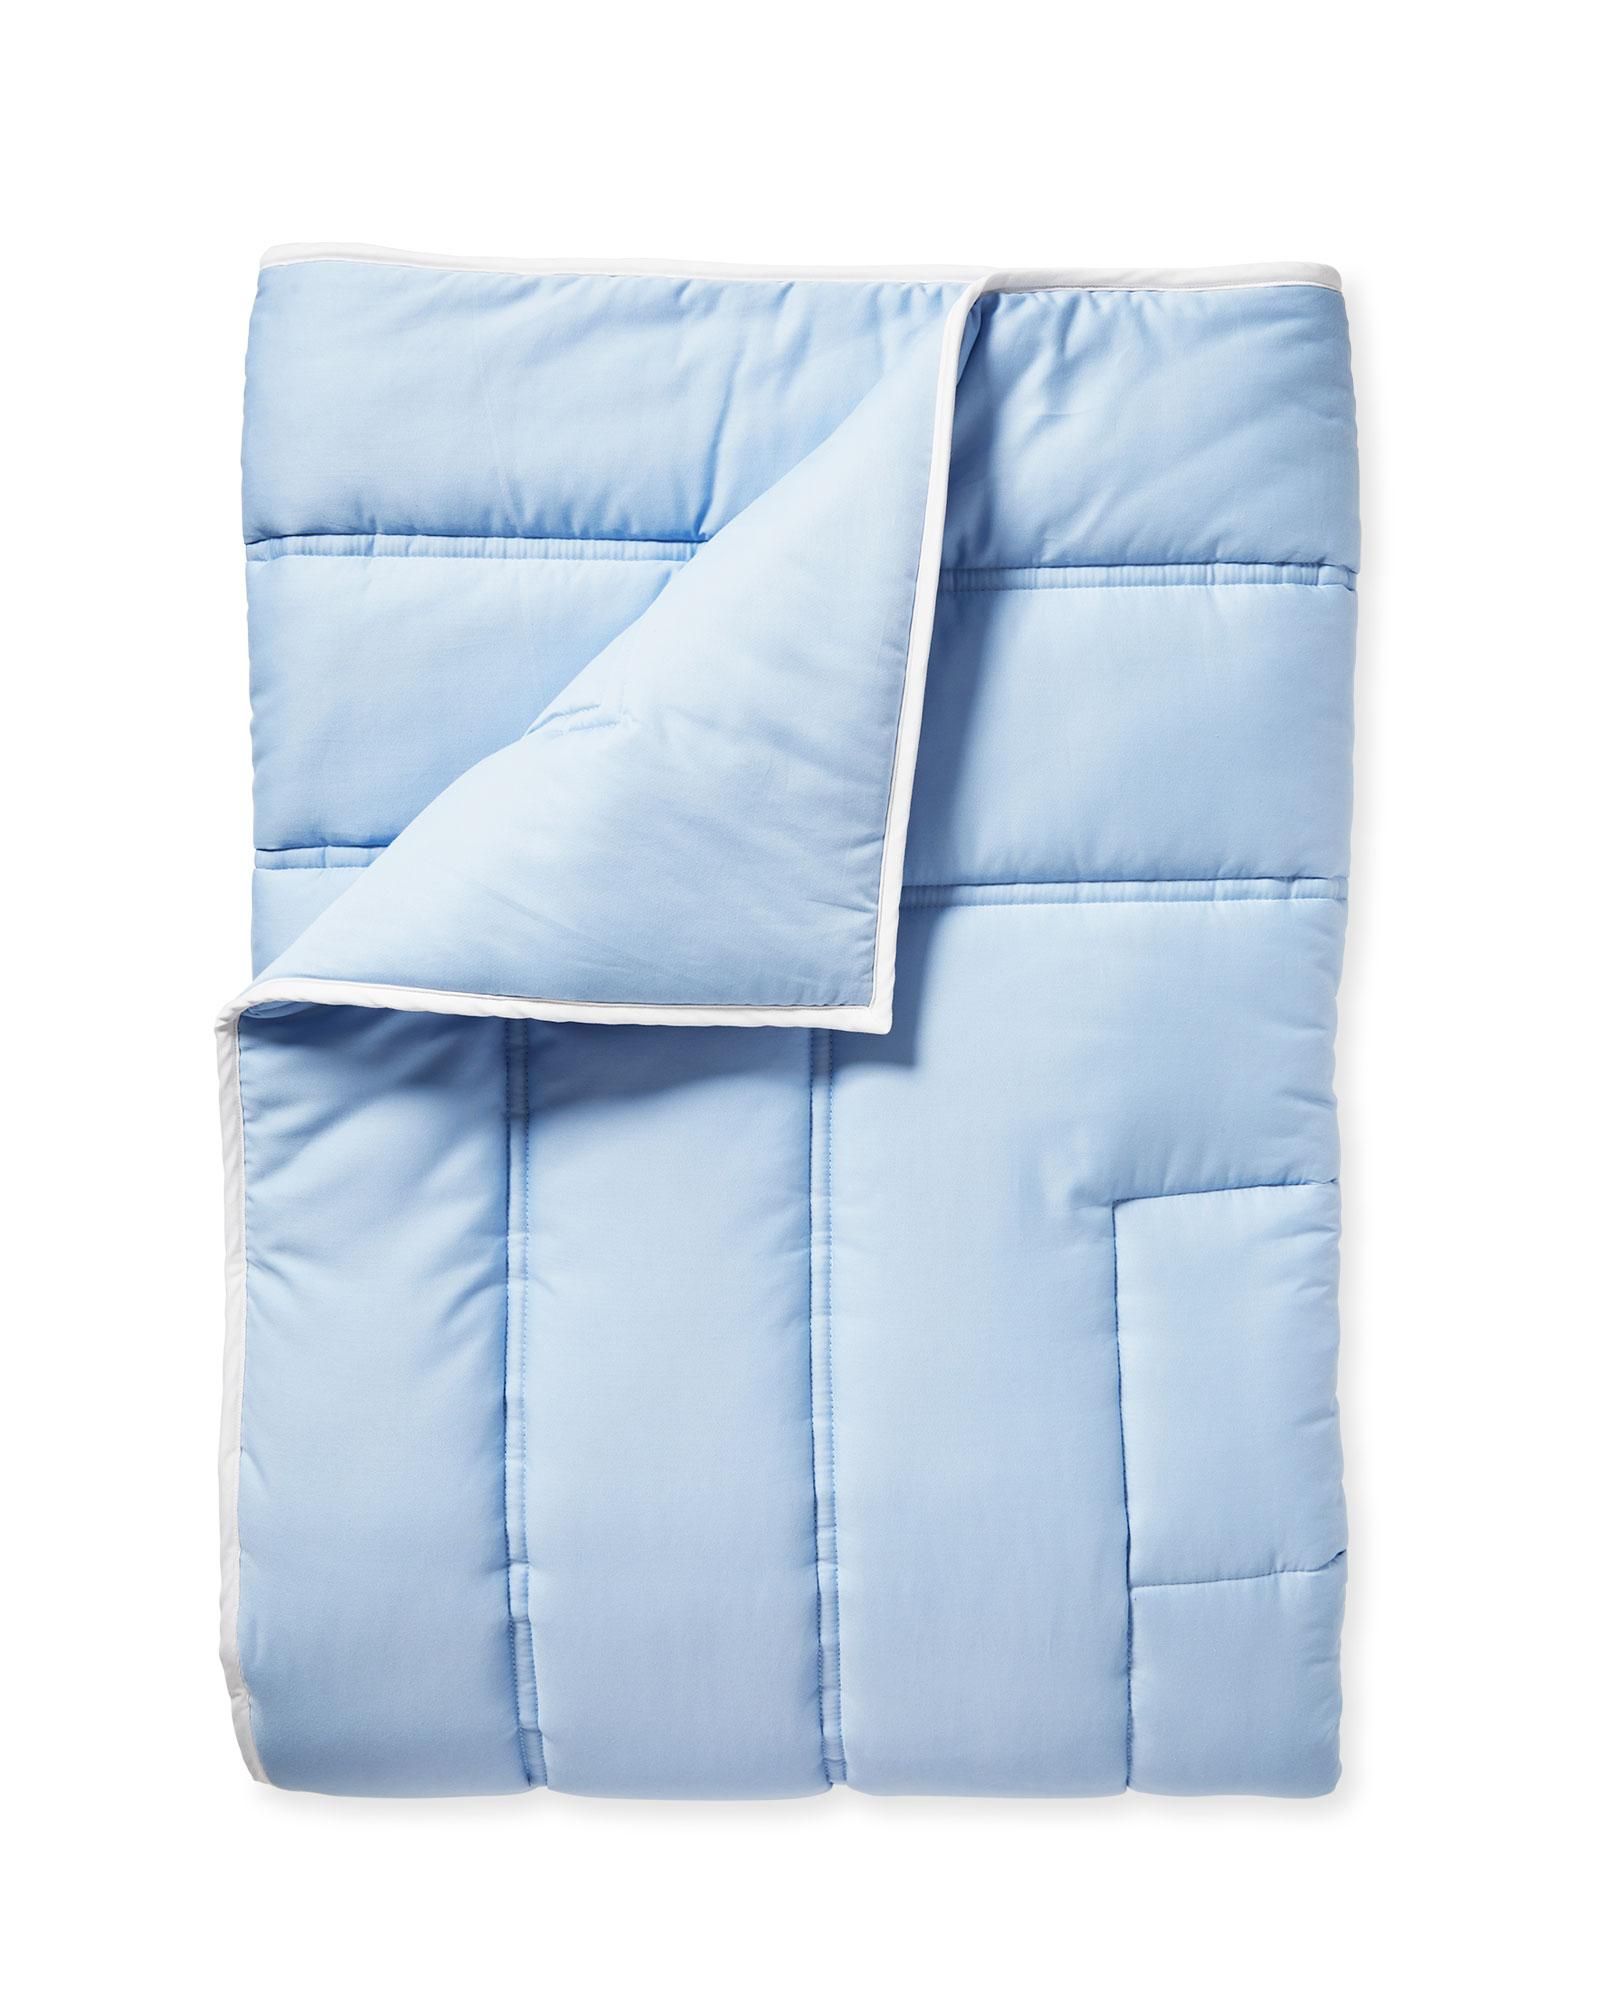 Colfax Comforter | Serena and Lily